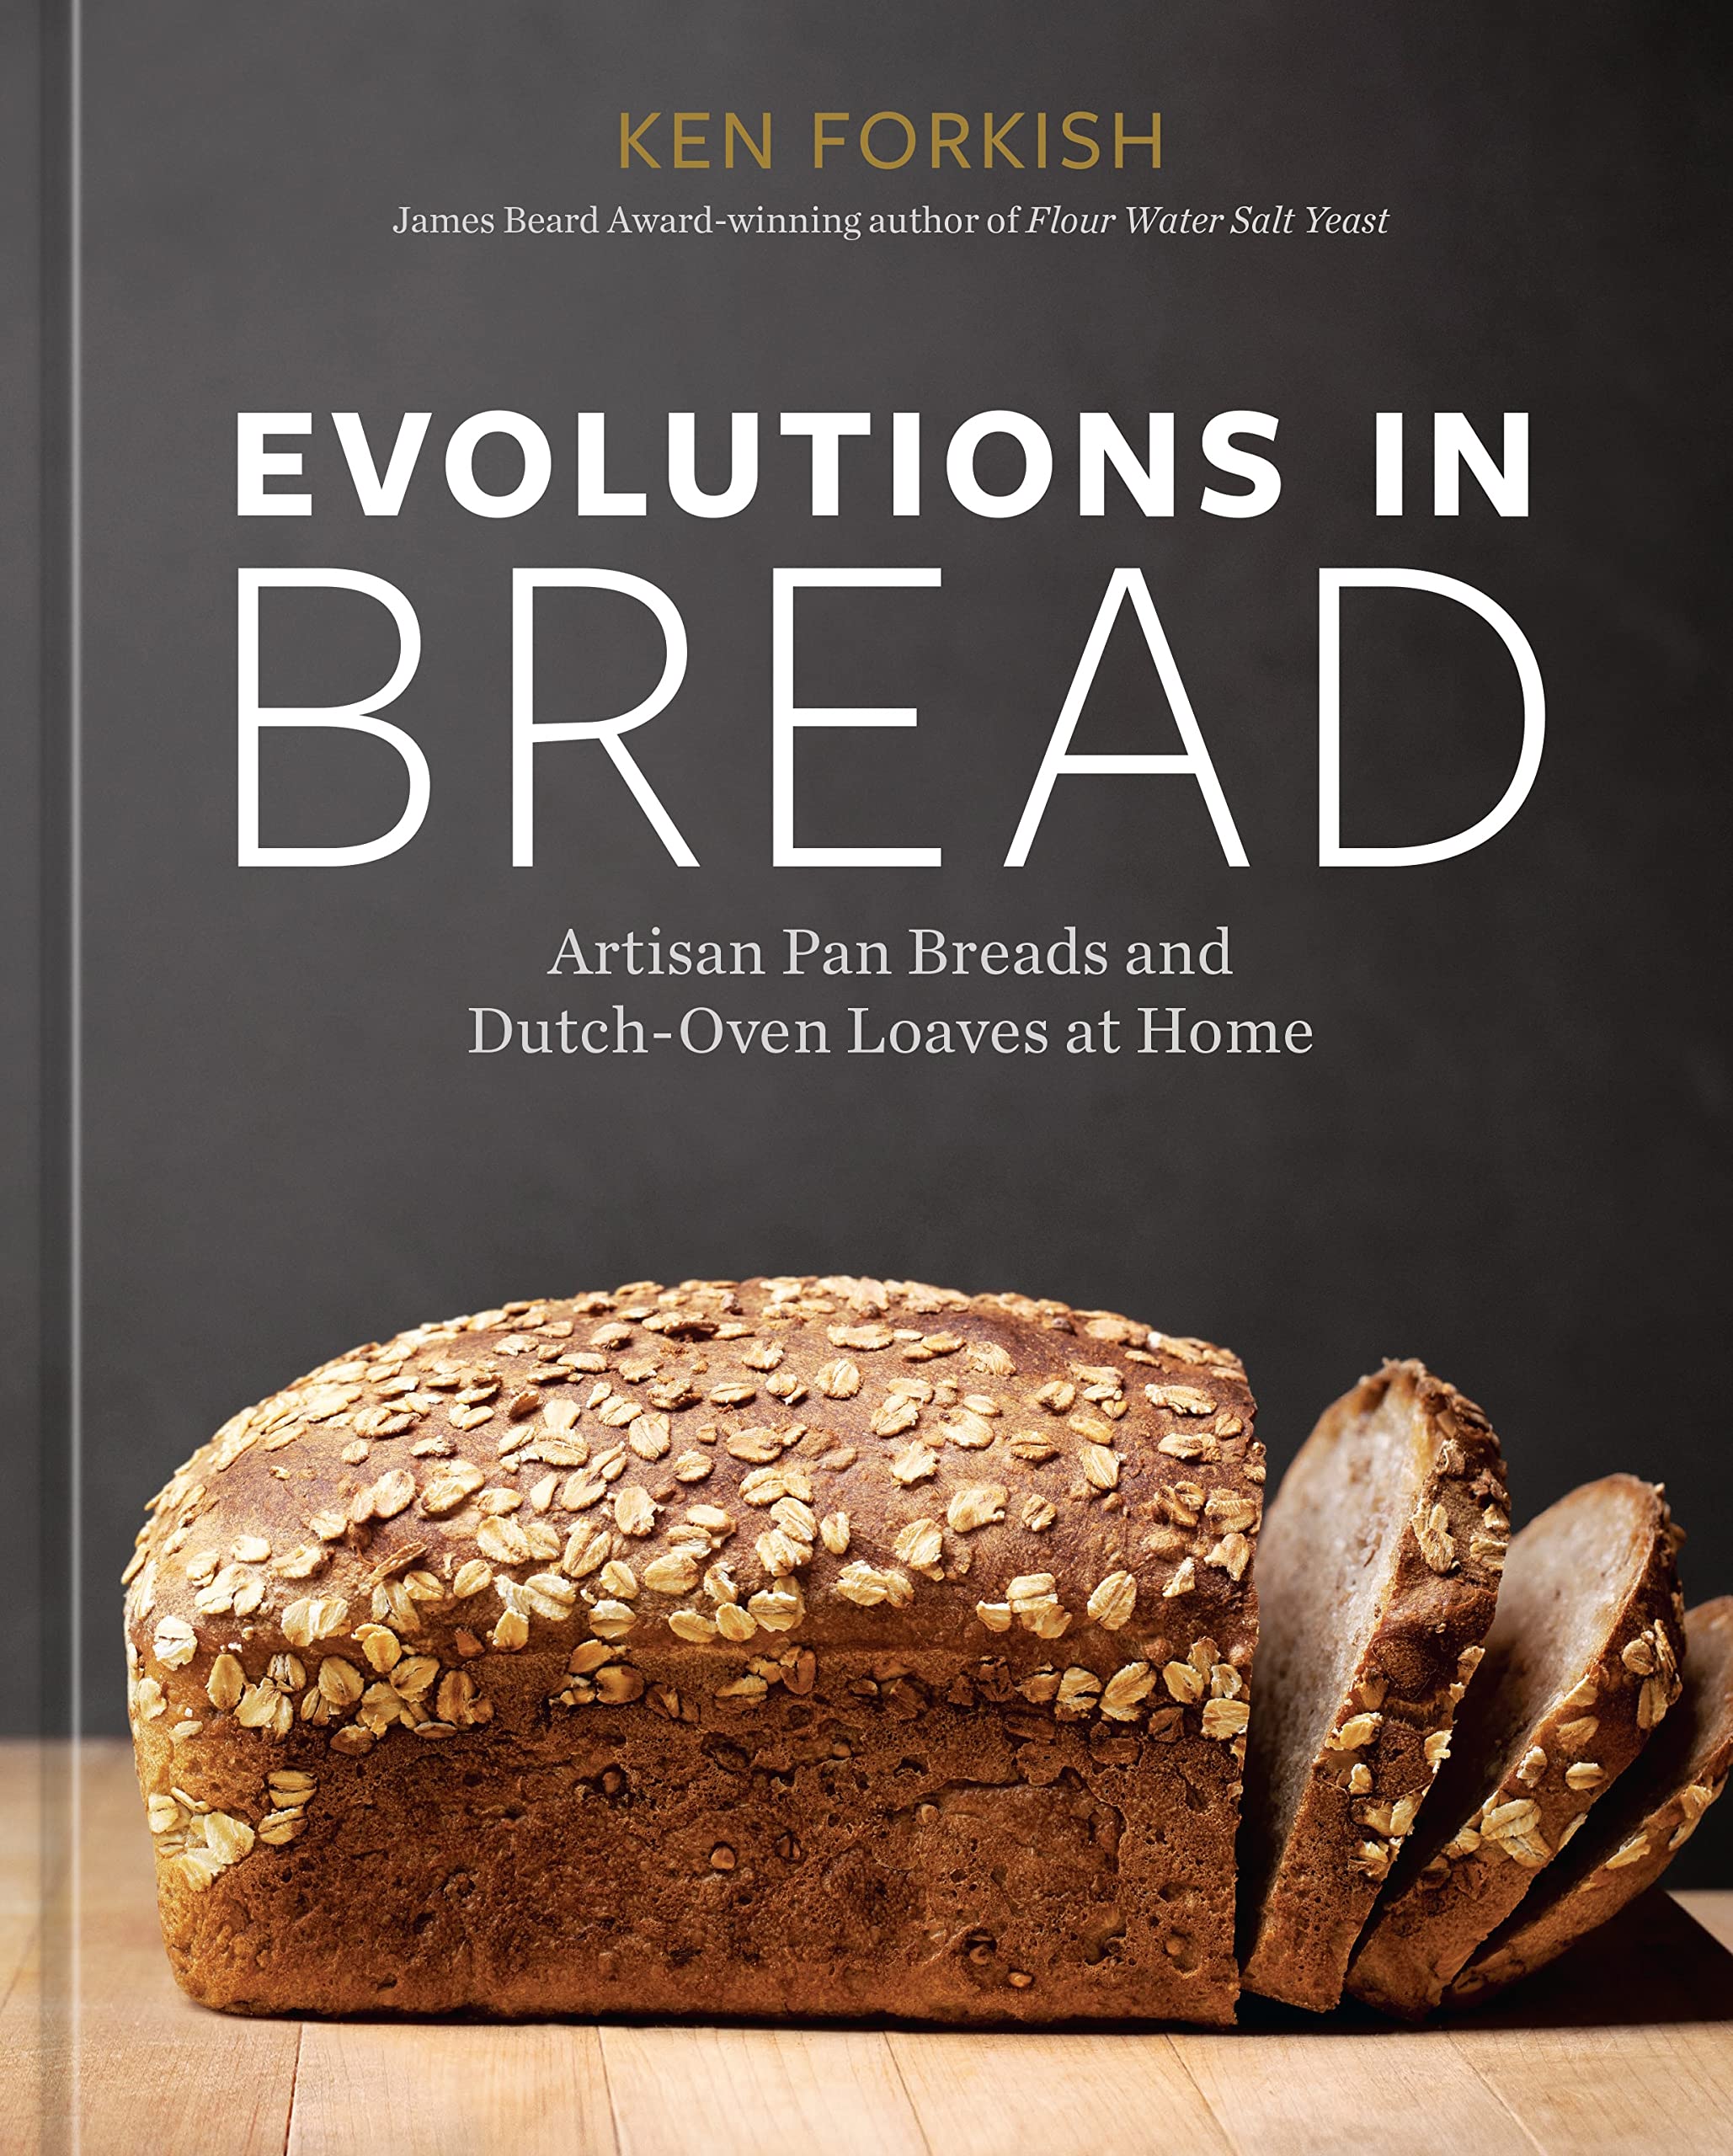 Evolutions in Bread: Artisan Pan Breads and Dutch-Oven Loaves at Home (Ken Forkish) *Signed*